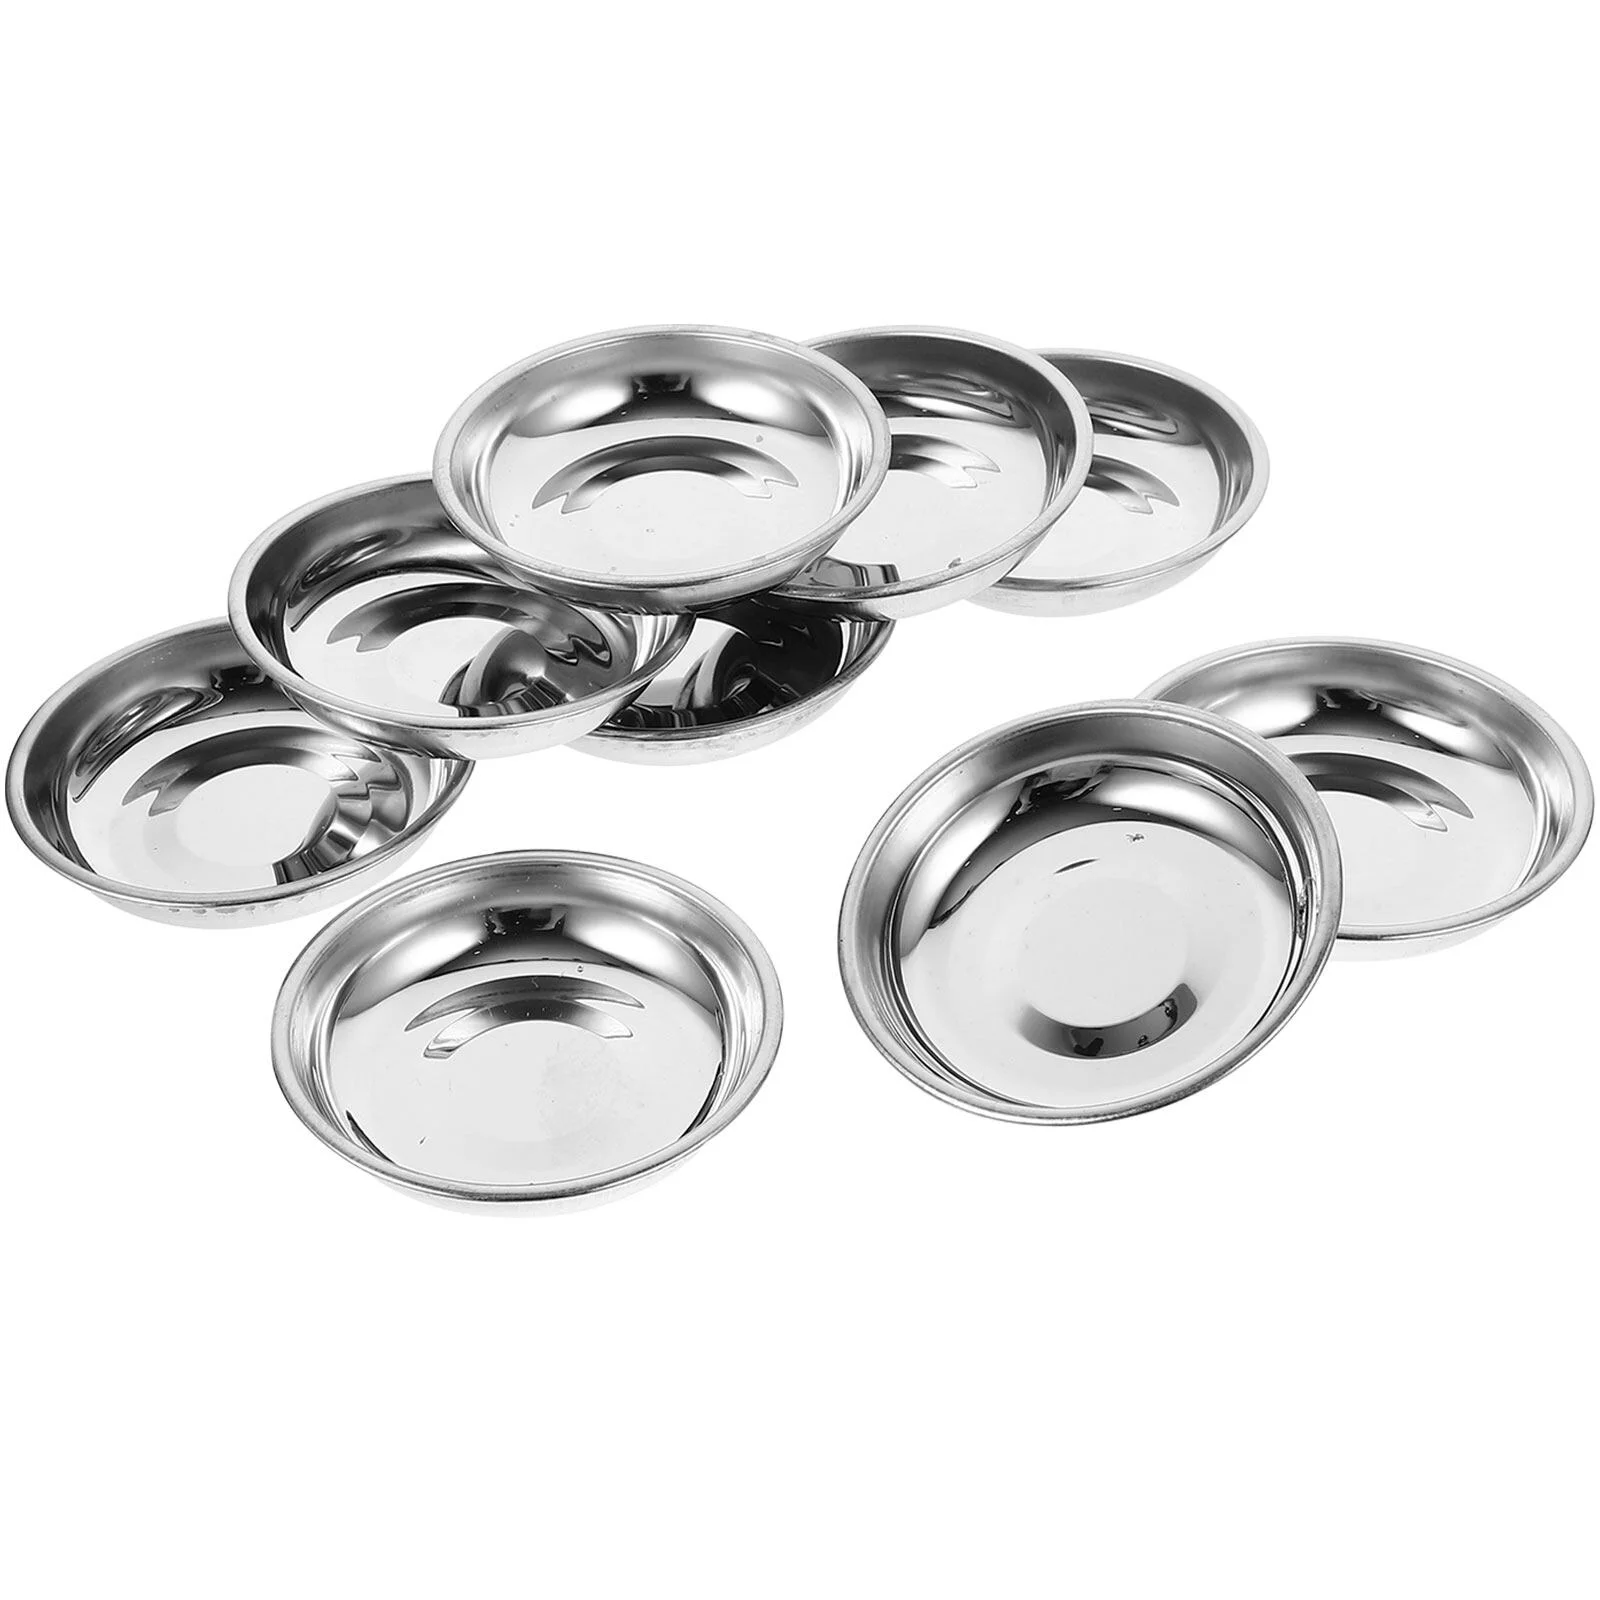 

10 Pcs Stainless Steel Plate Individual Chips Sauce Dishes Appetizer Serving Dessert Snack Cup Spice Gear